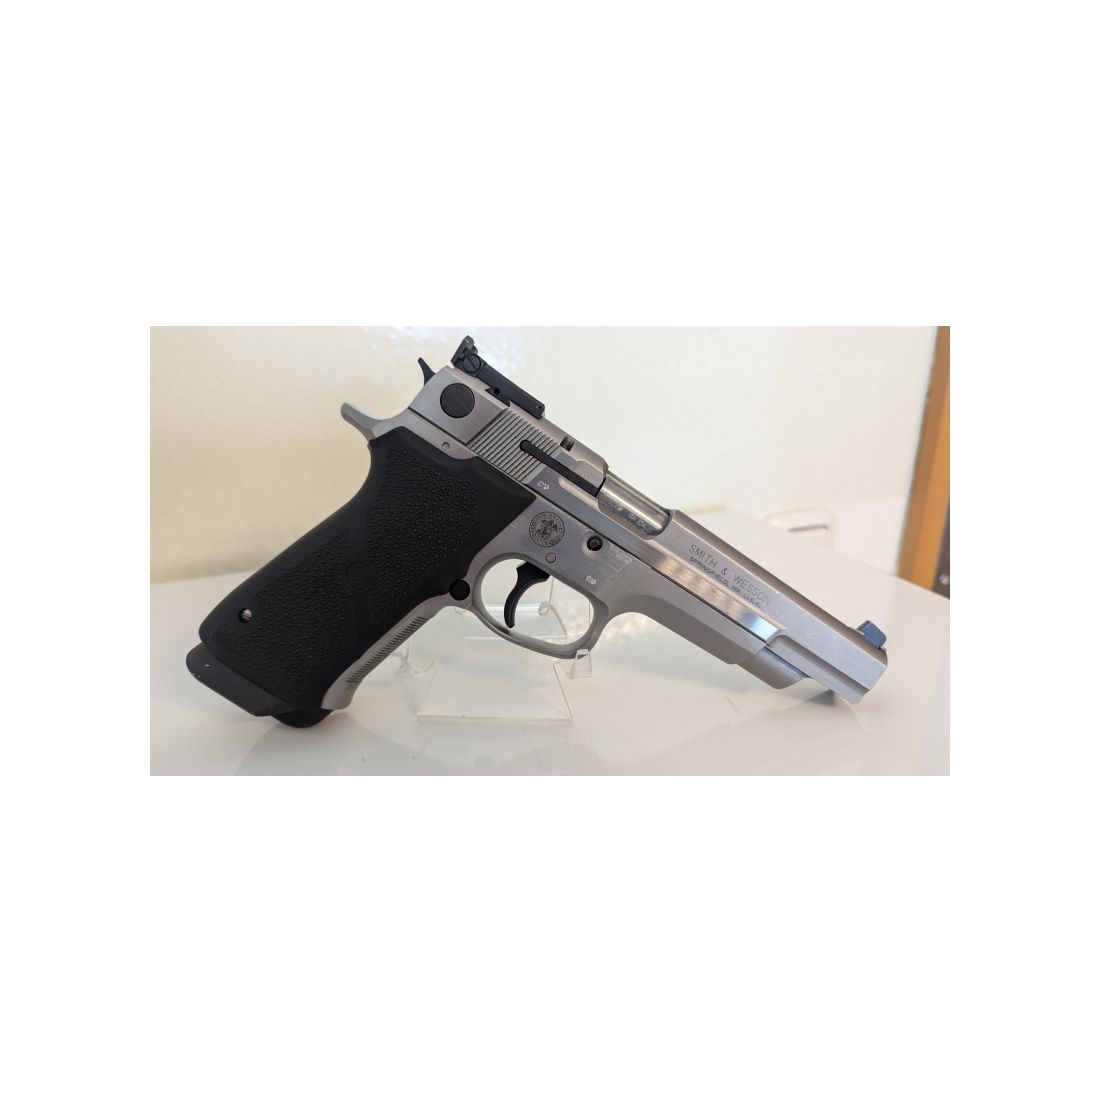 Smith & Wesson Target Champion 9mm Luger